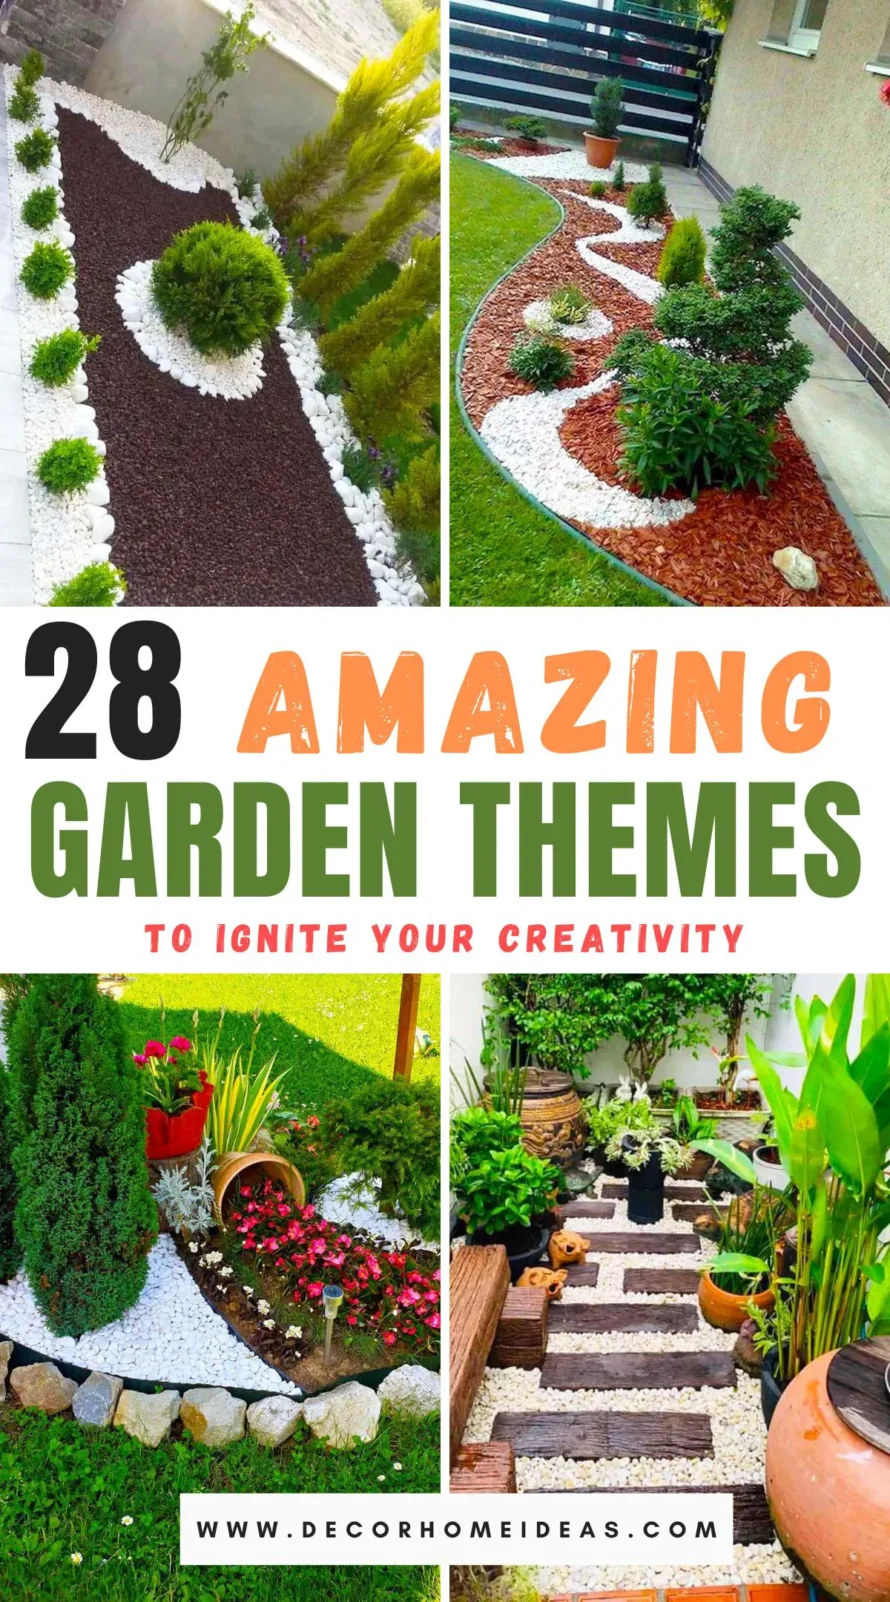 Unleash your creativity with 28 spectacular garden themes! From whimsical fairy gardens to sleek modern landscapes, find the perfect style to express your gardening flair and transform your outdoor space into a stunning retreat.